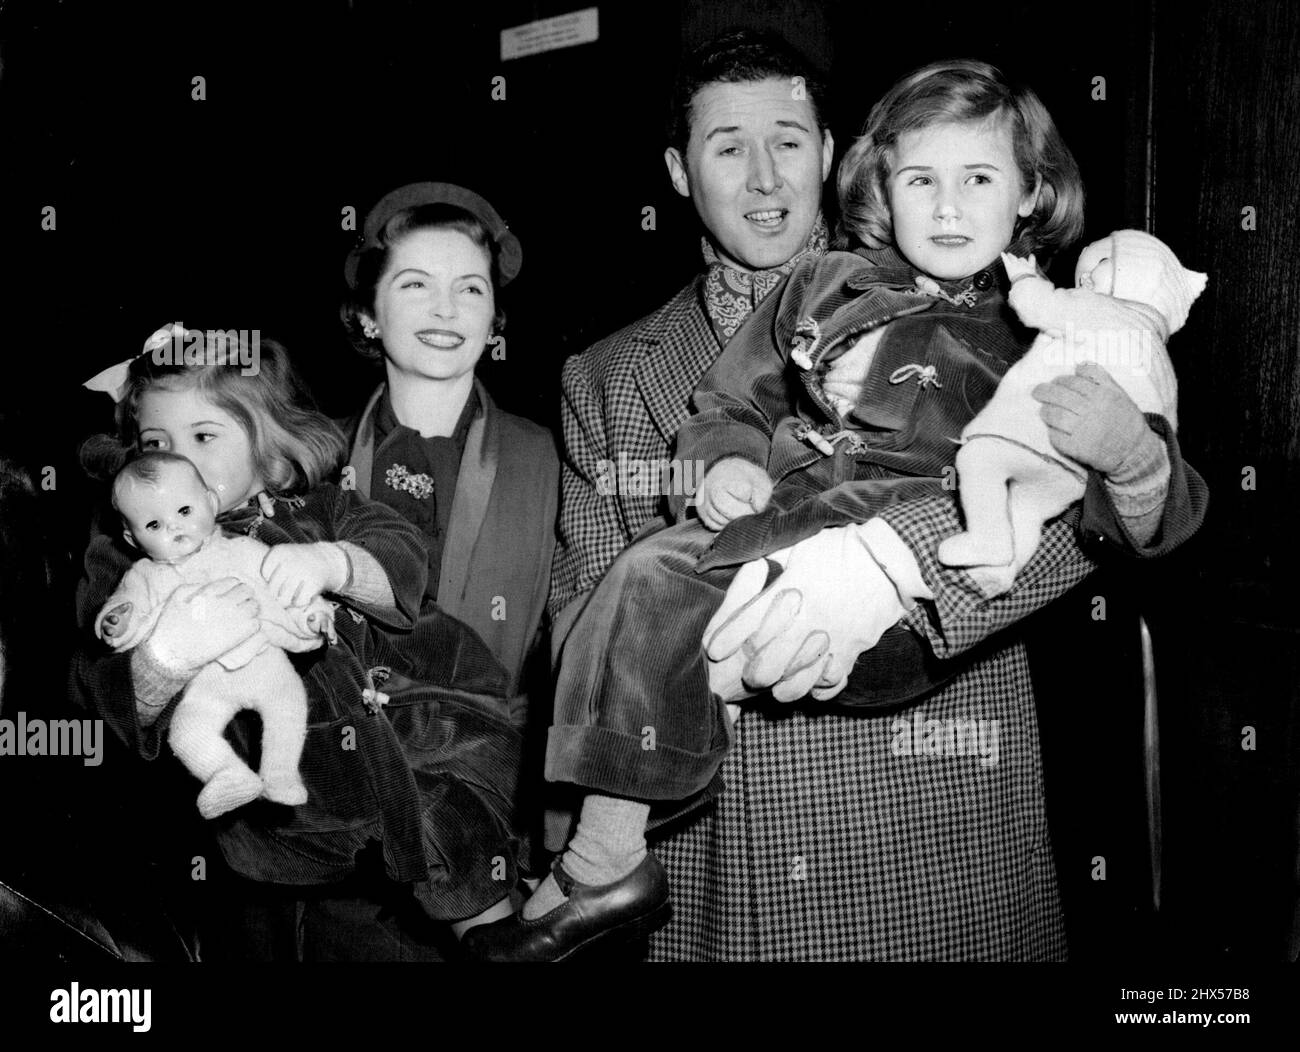 Quayle Family Off On Australasian Tour -- Mr. and Mrs. Anthony Quayle with their children on departure from Liverpool Street that Mrs. Quayle (Dorothy Hyson) is ***** Jennifer, 2½; Mr. Quayle is holding Rosanna, 4½.Members of a company of 30 artists and technicians from the Shakespeare Memorial Theatre, Stratford-on-Avon, left Liverpool Street Station, London, to-day (Tuesday) to board the New Zealand Shipping Company's liner Rangitikei at Royal Albert Dock, London. They are off on a nine-month tour of New Zealand and Australia under the leadership of Mr. Anthony Quayle (co-director with Glen Stock Photo